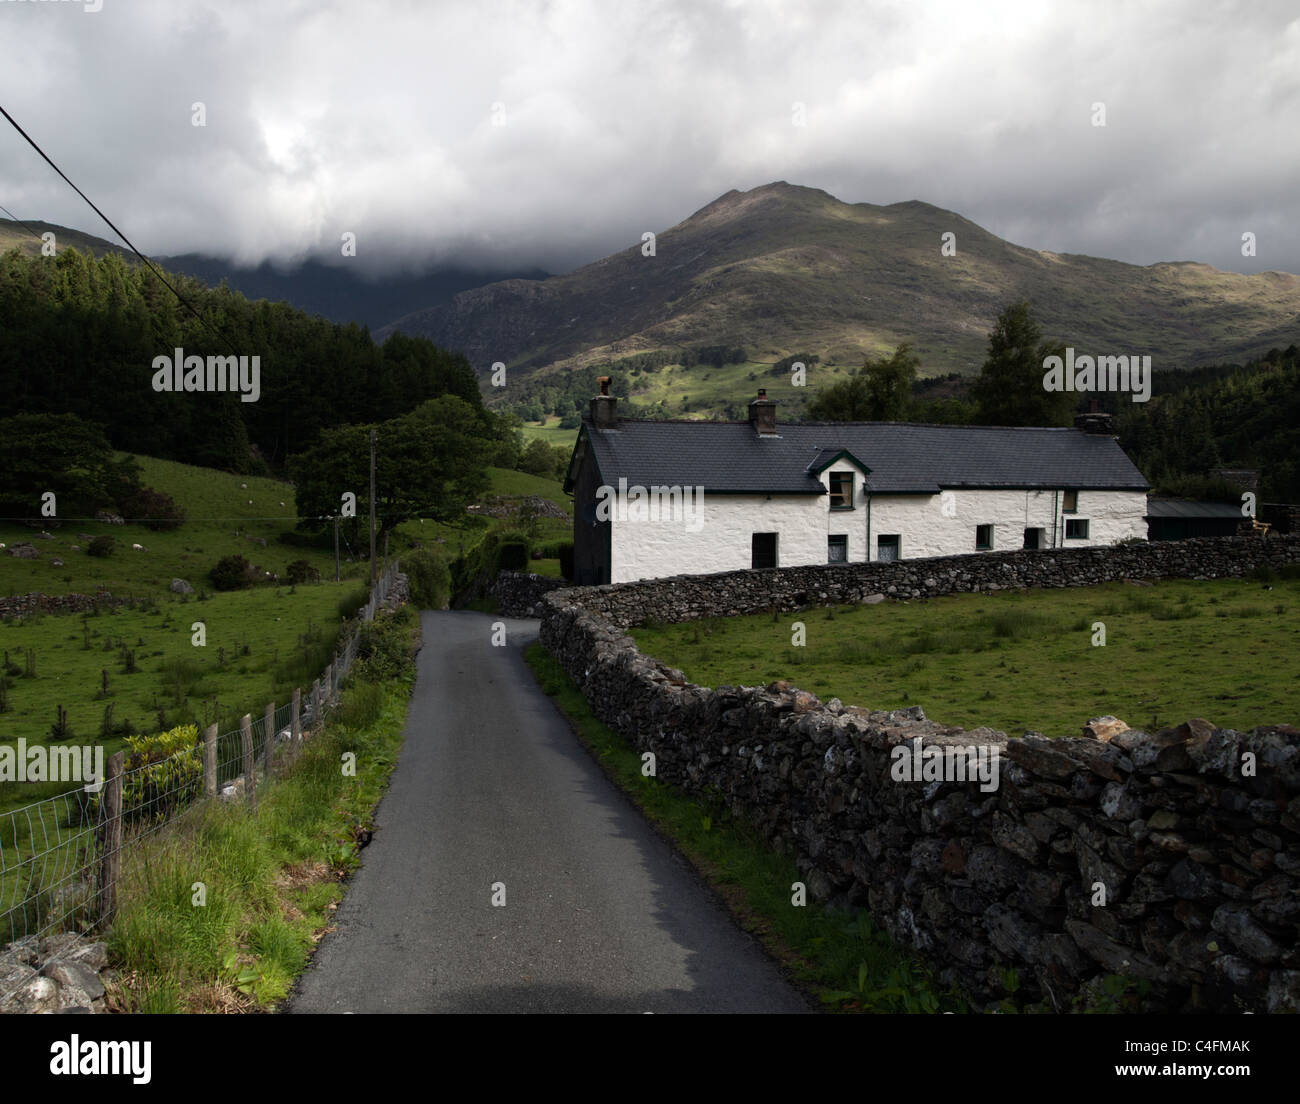 Cottage in Snowdonia, North Wales Stock Photo